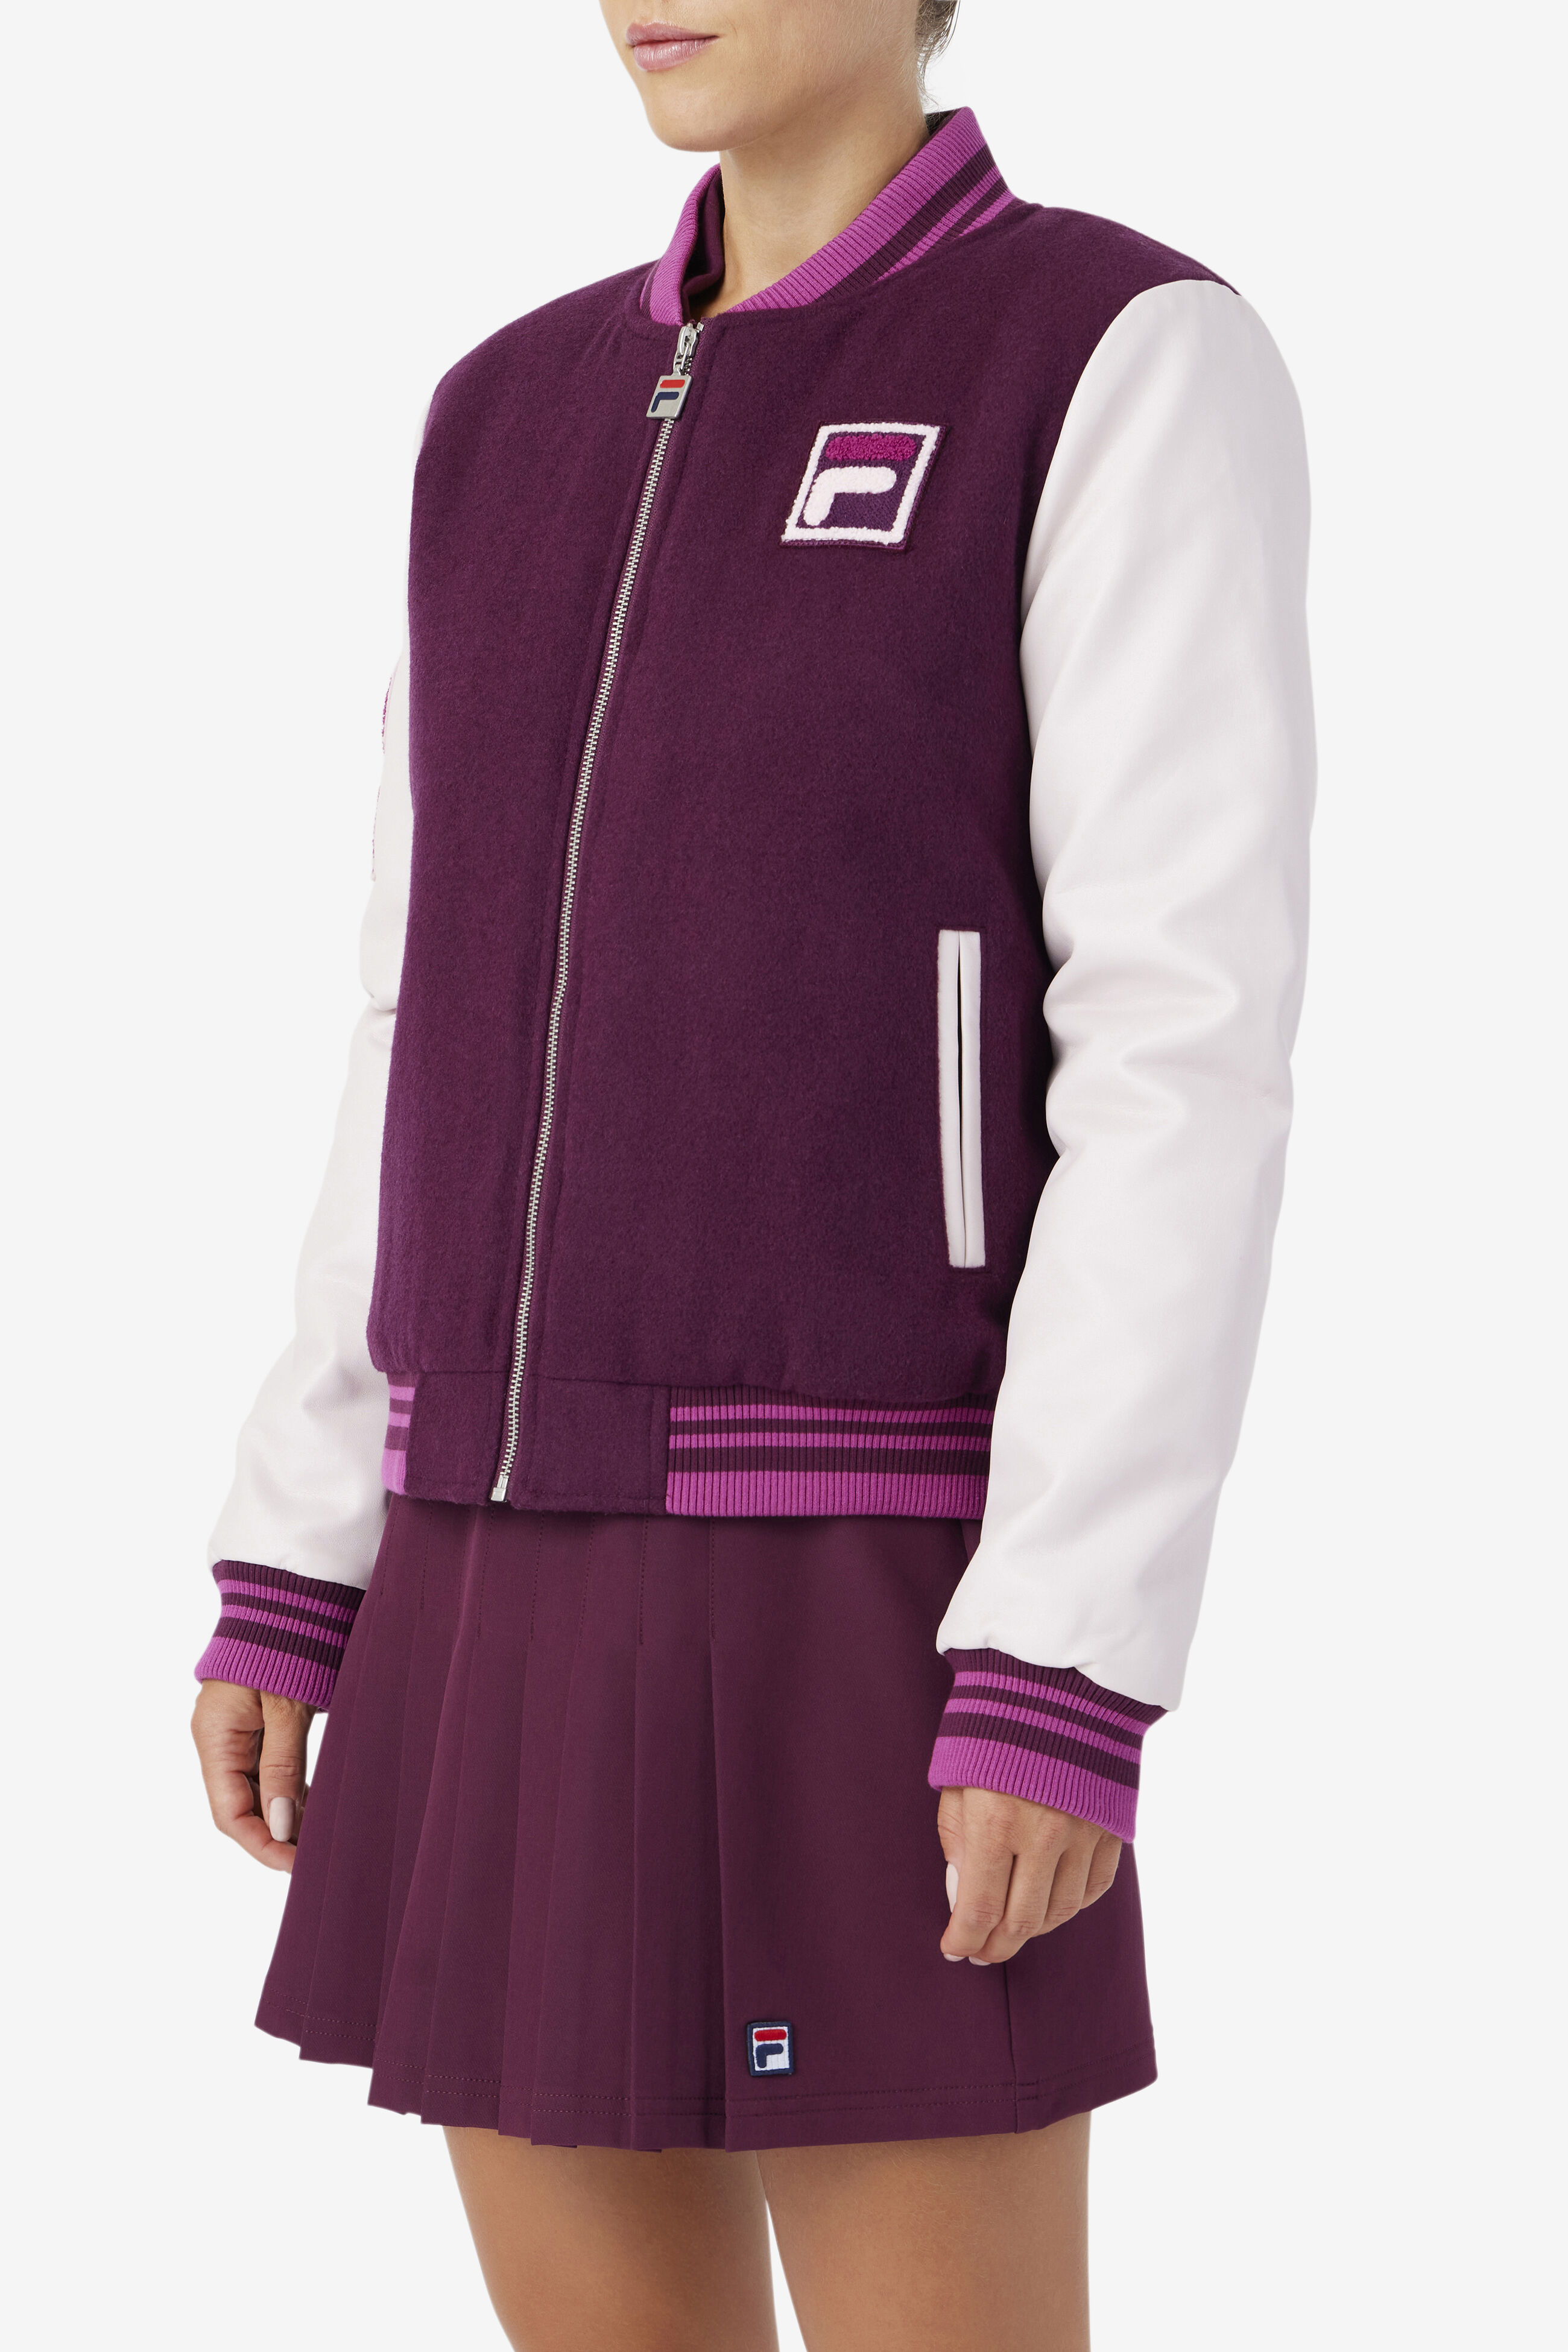 Legendary and trendy jackets for fashionable ladies | FILA Europa